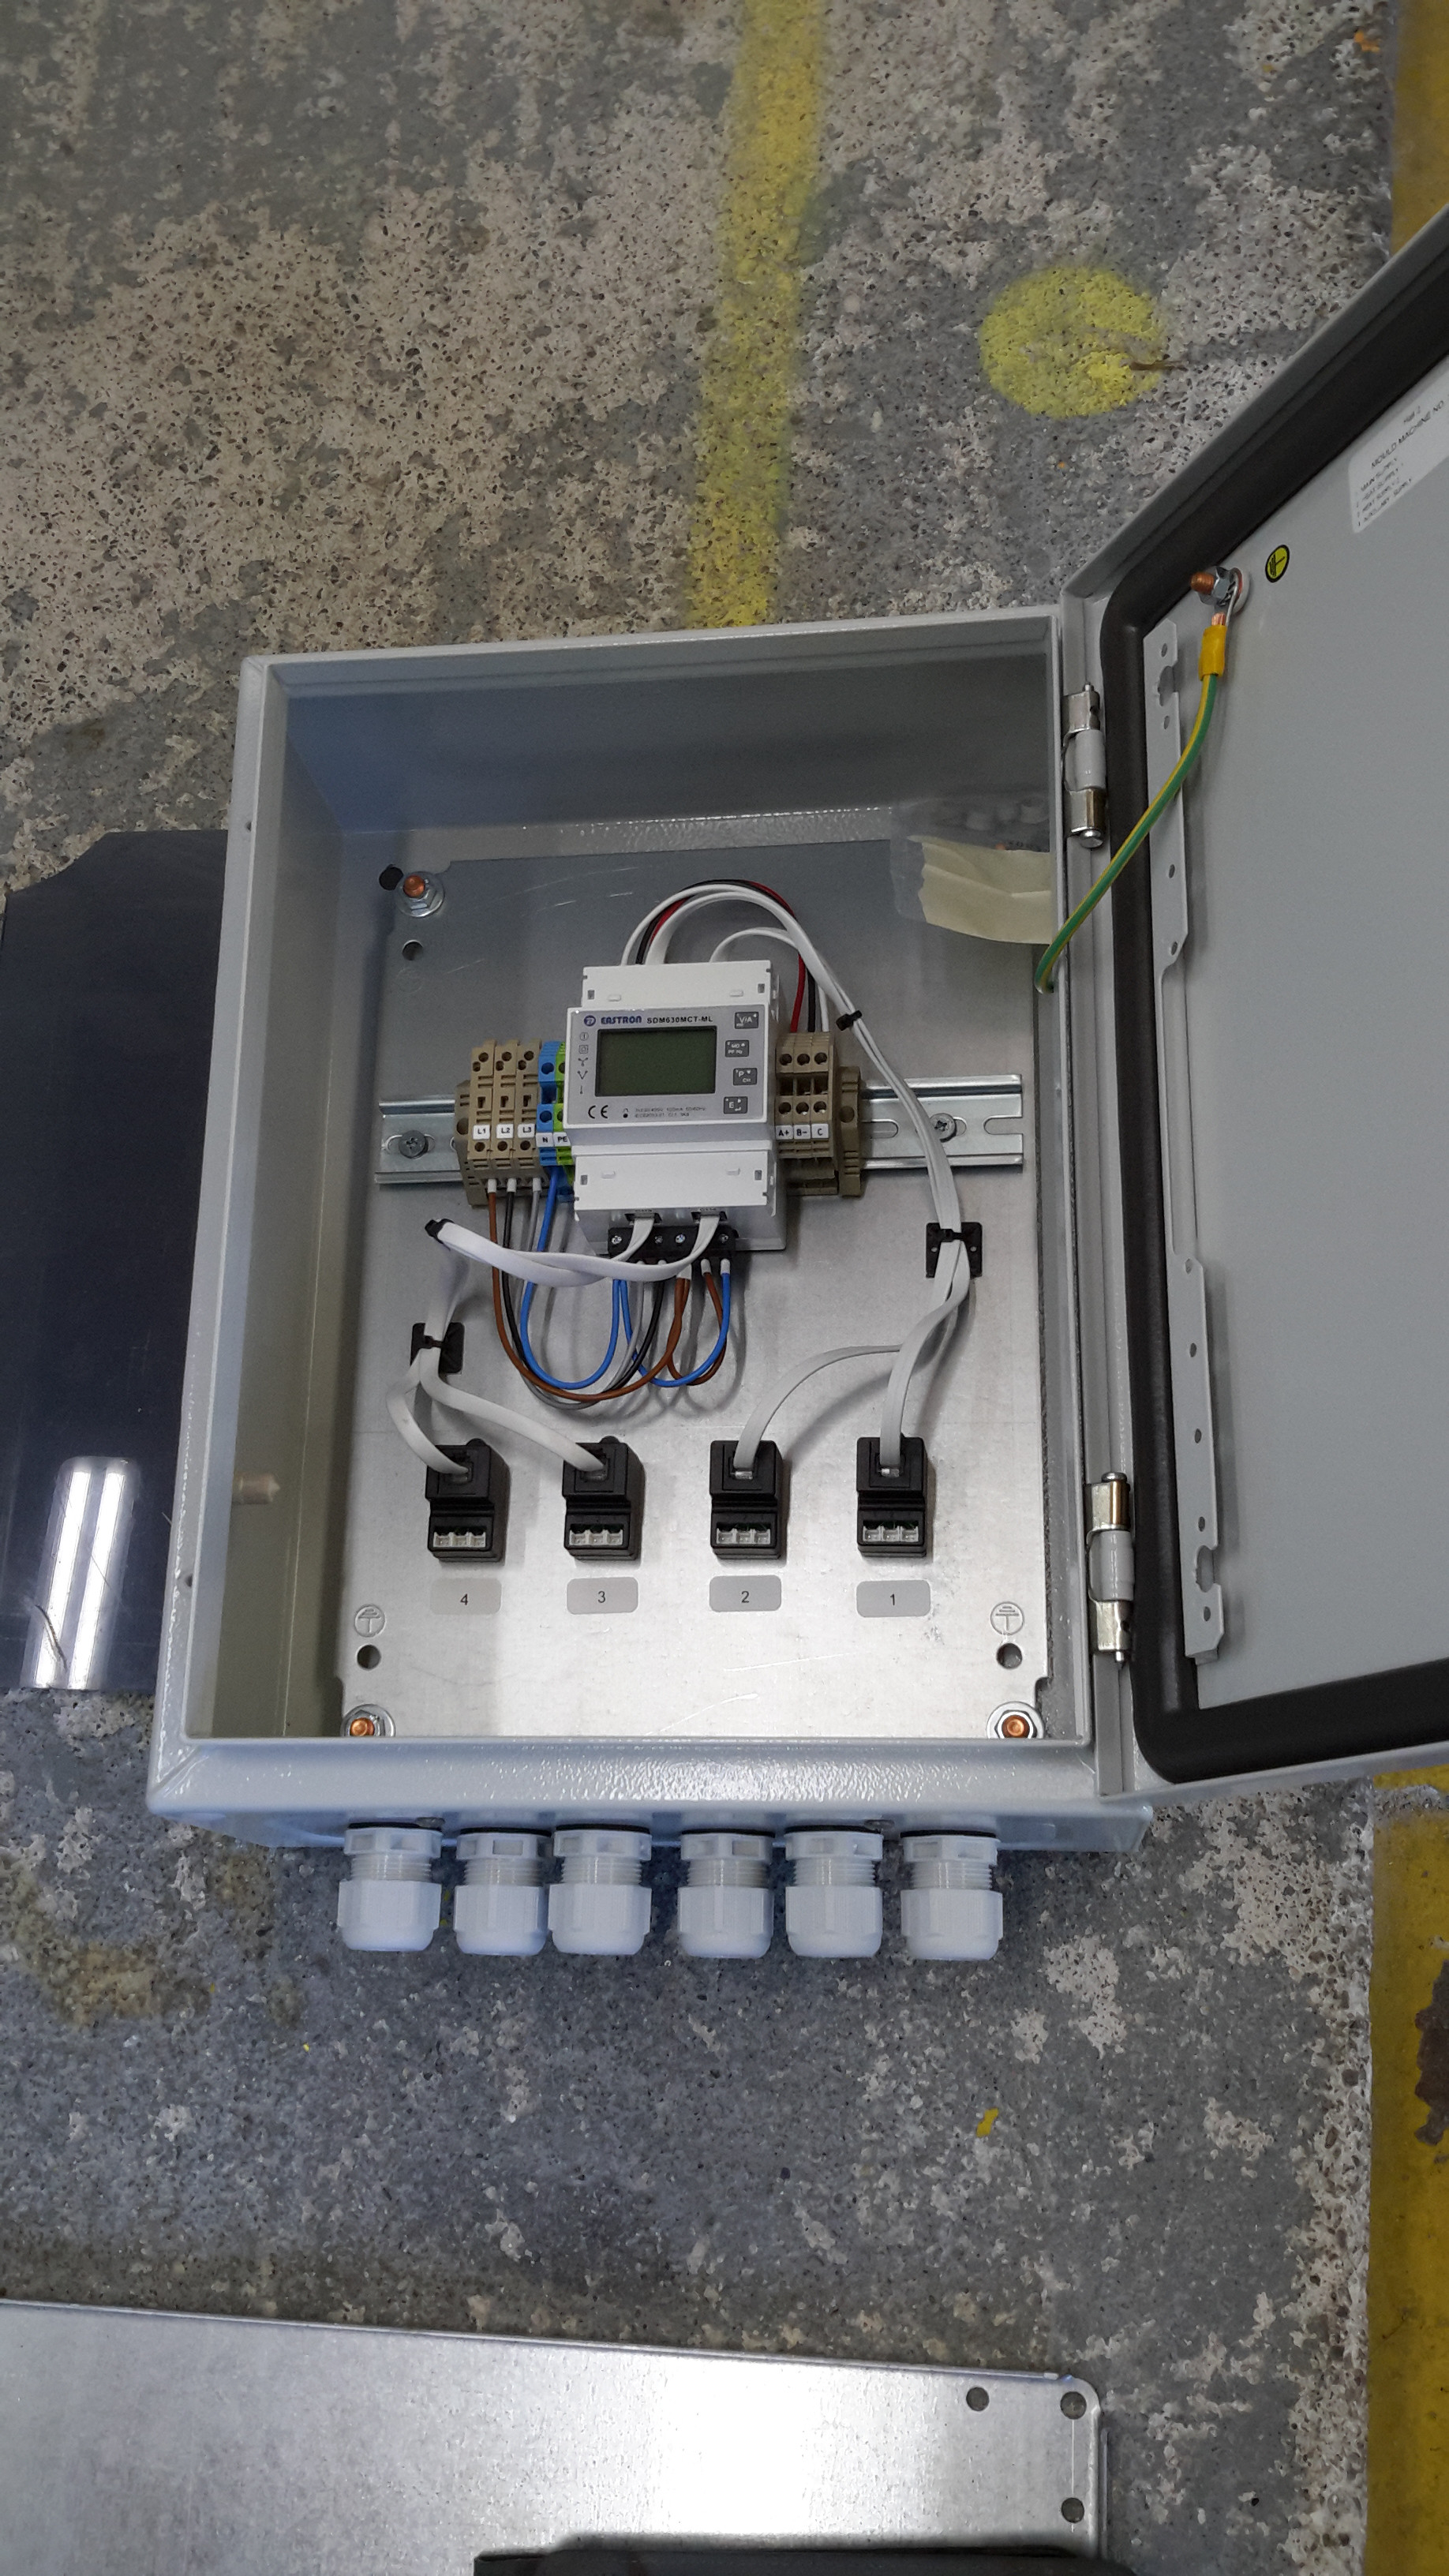 Full Energy Monitoring Solution Installed in a Factory Plant Without Disruption